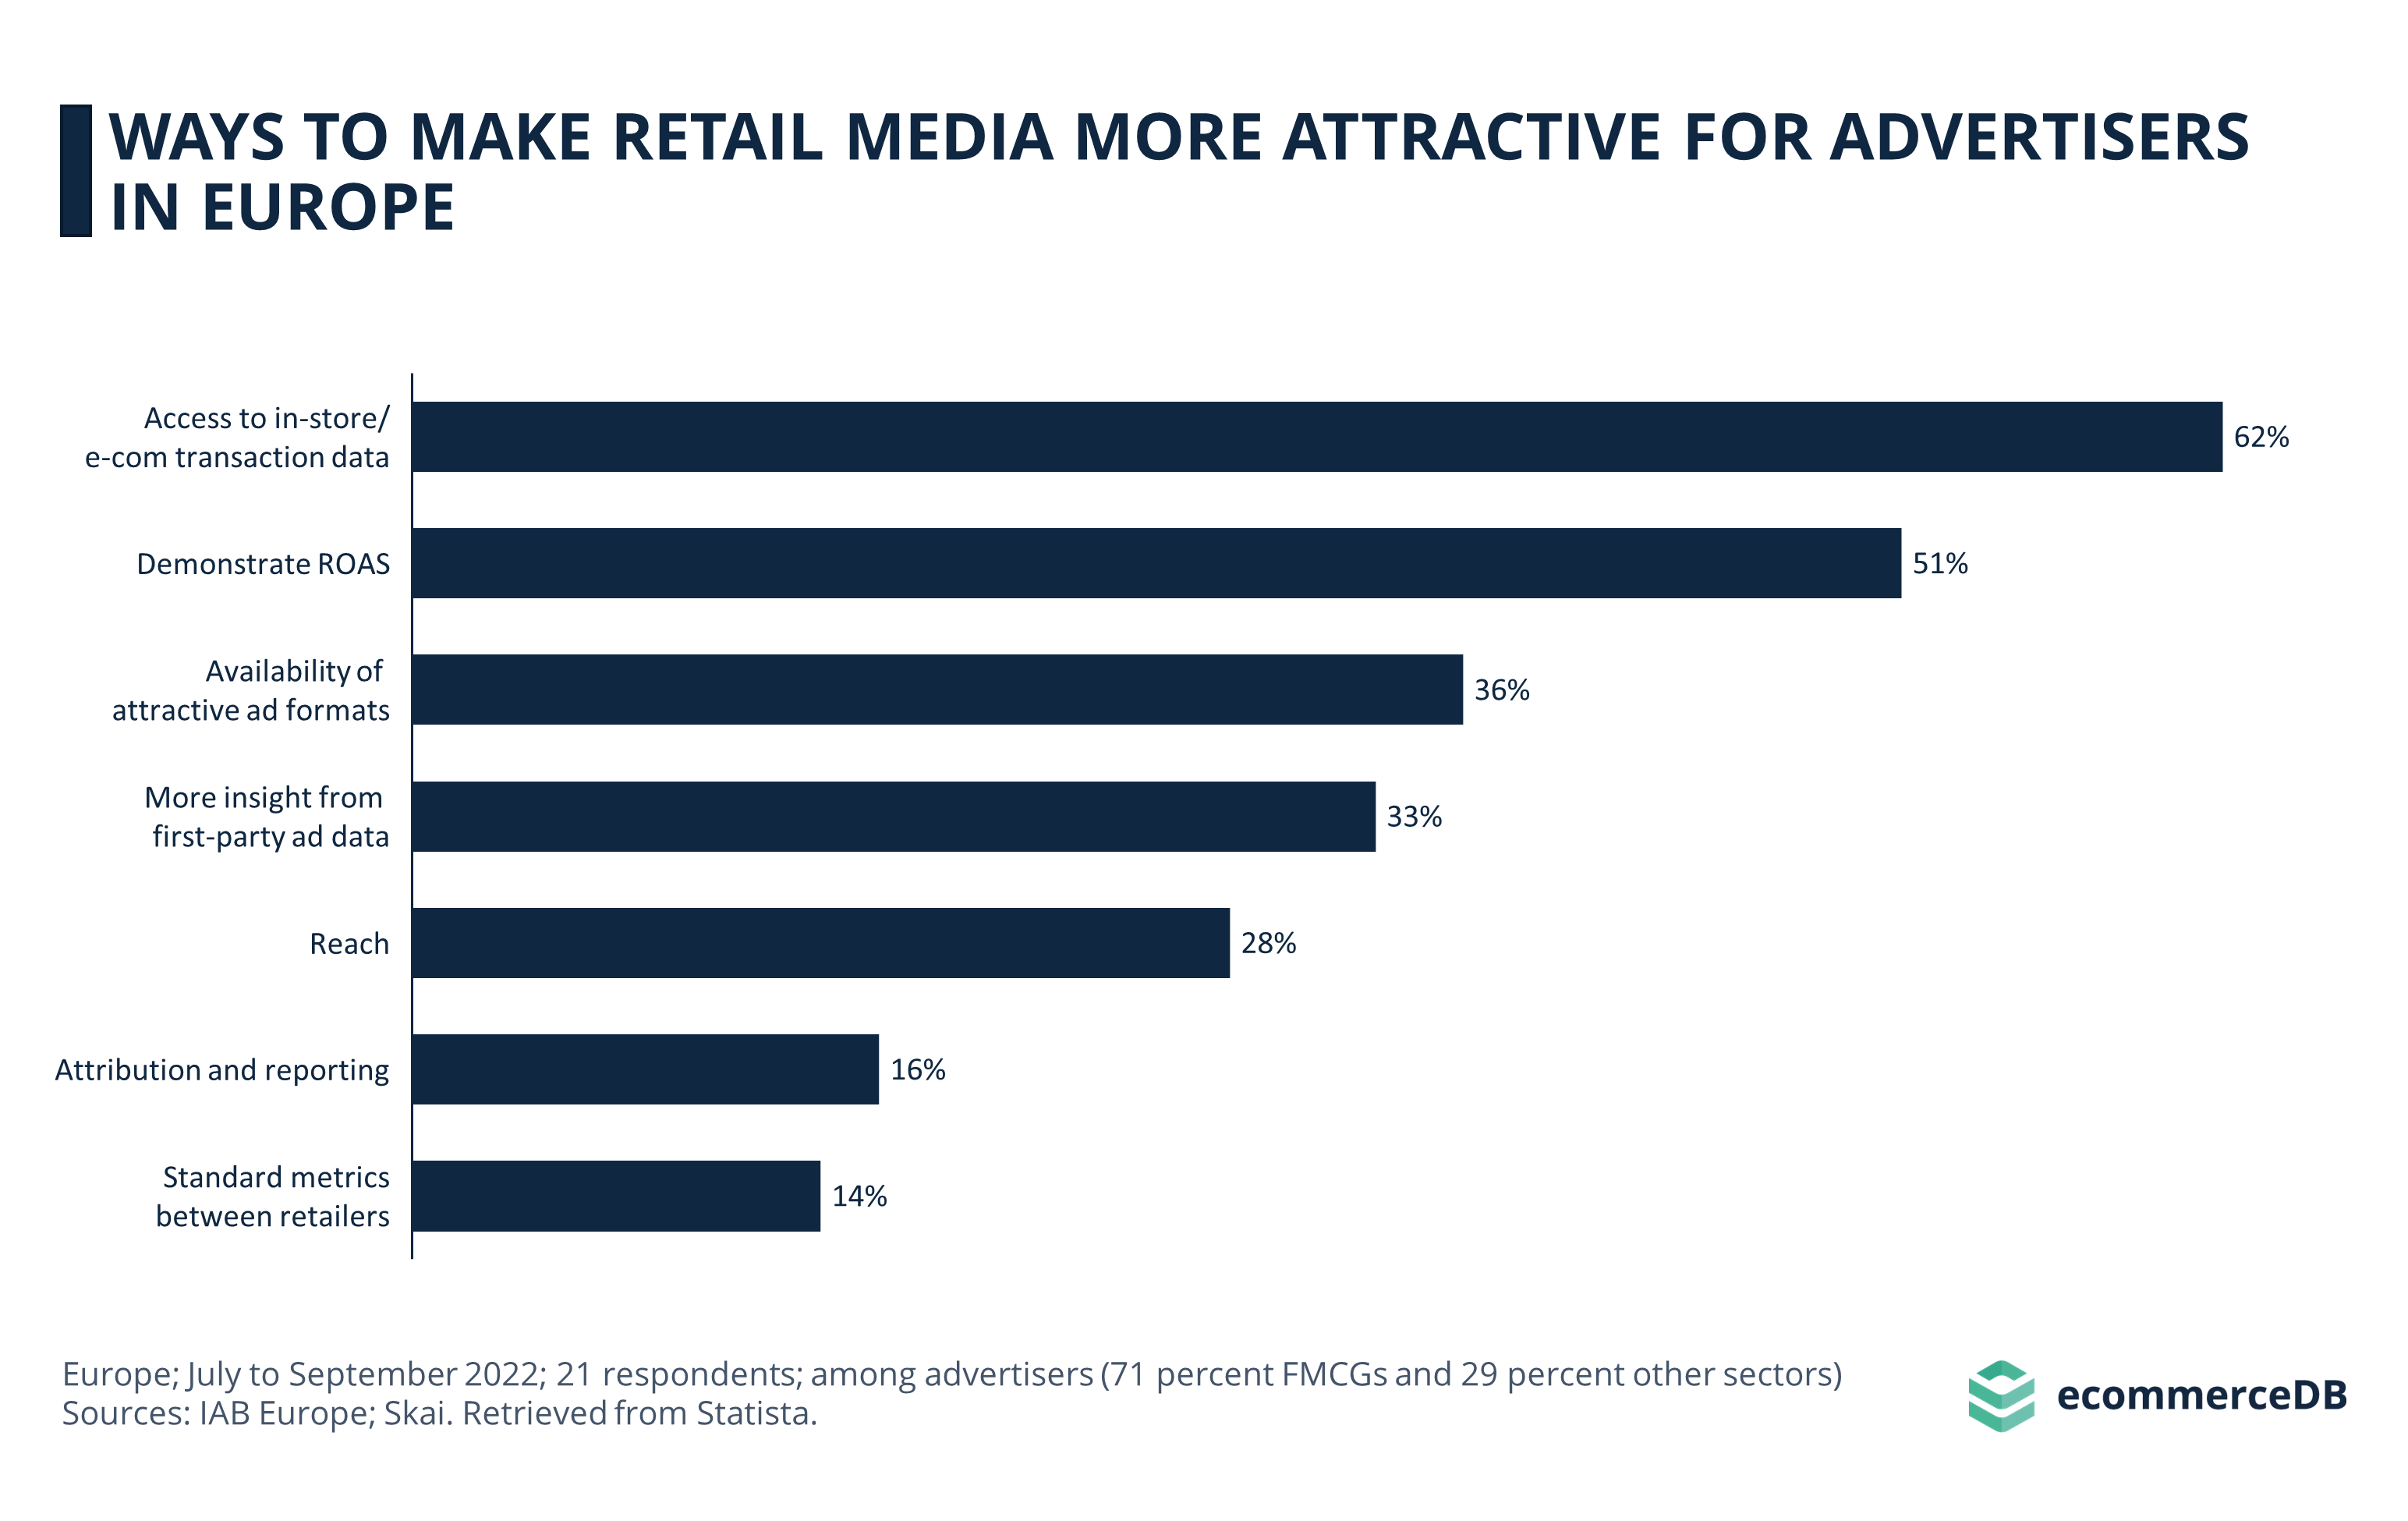 Ways to Make Retail Media More Attractive for Advertisers in Europe